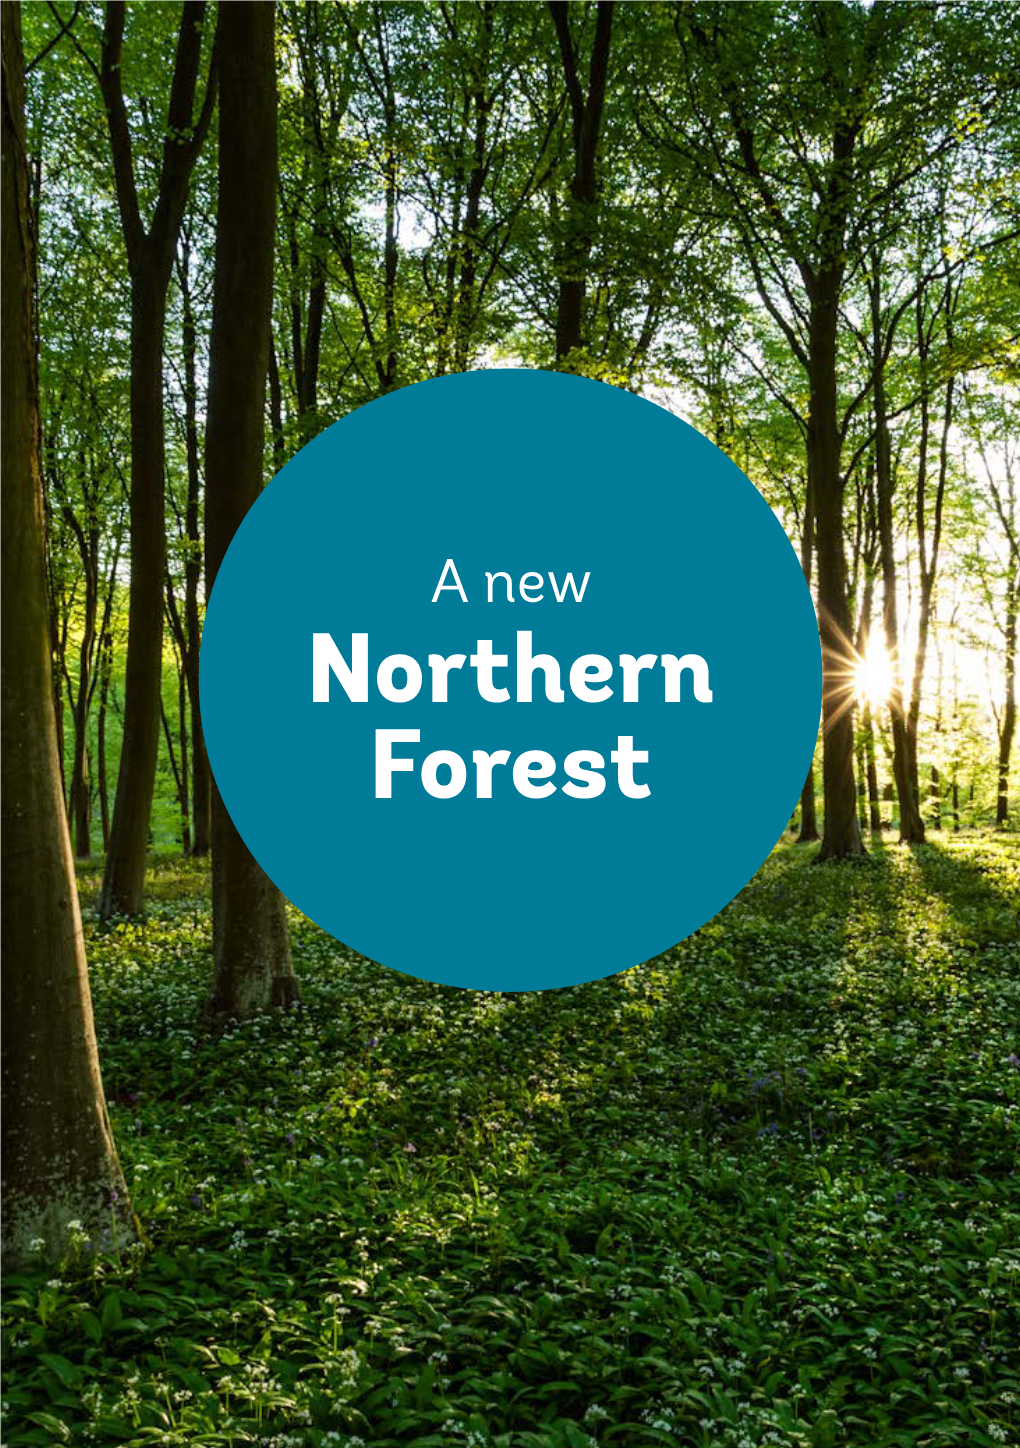 Northern Forest Prospectus